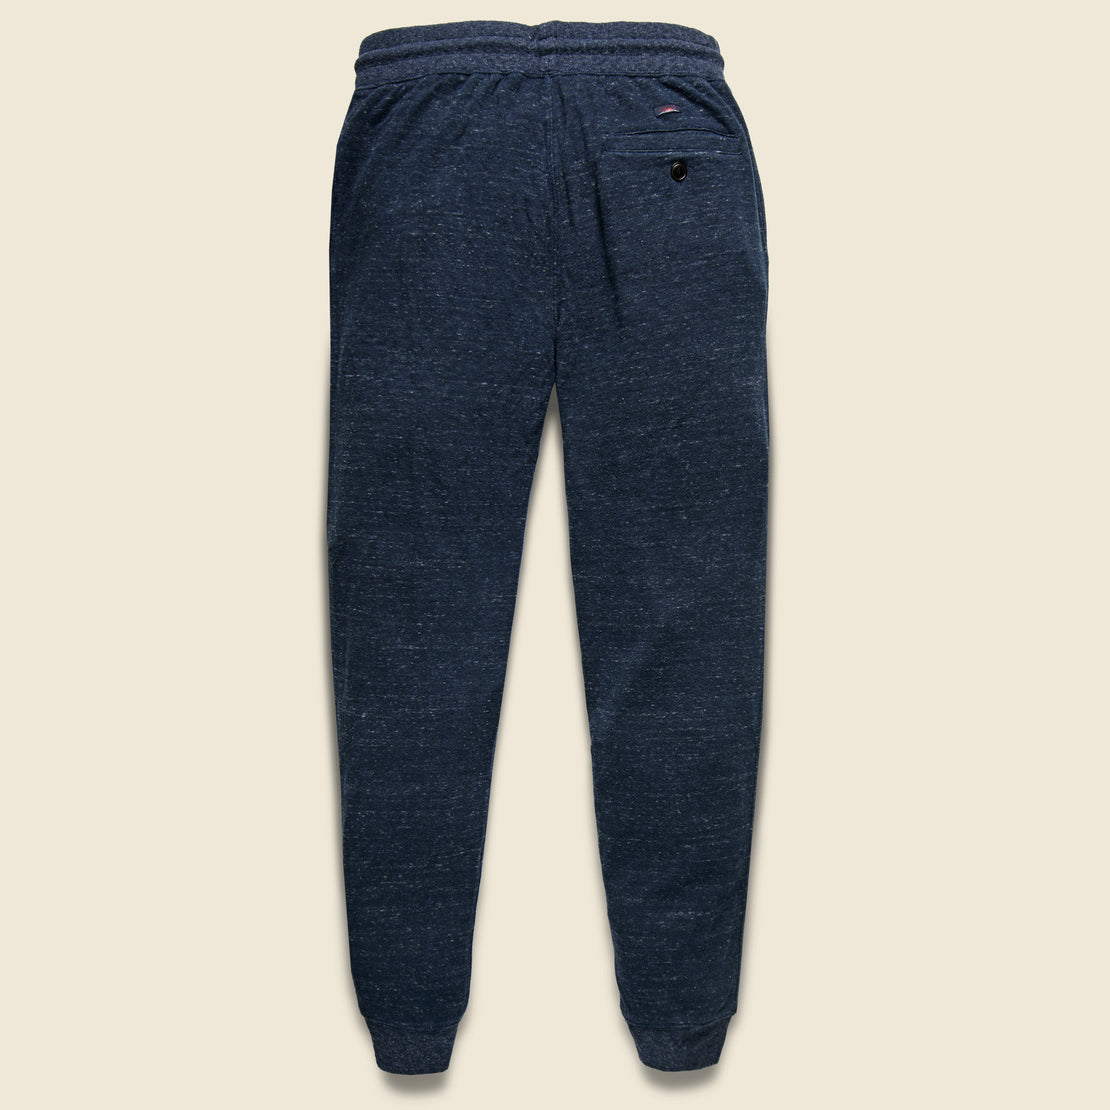 Dual Knit Sweatpant - Navy - Faherty - STAG Provisions - Pants - Lounge